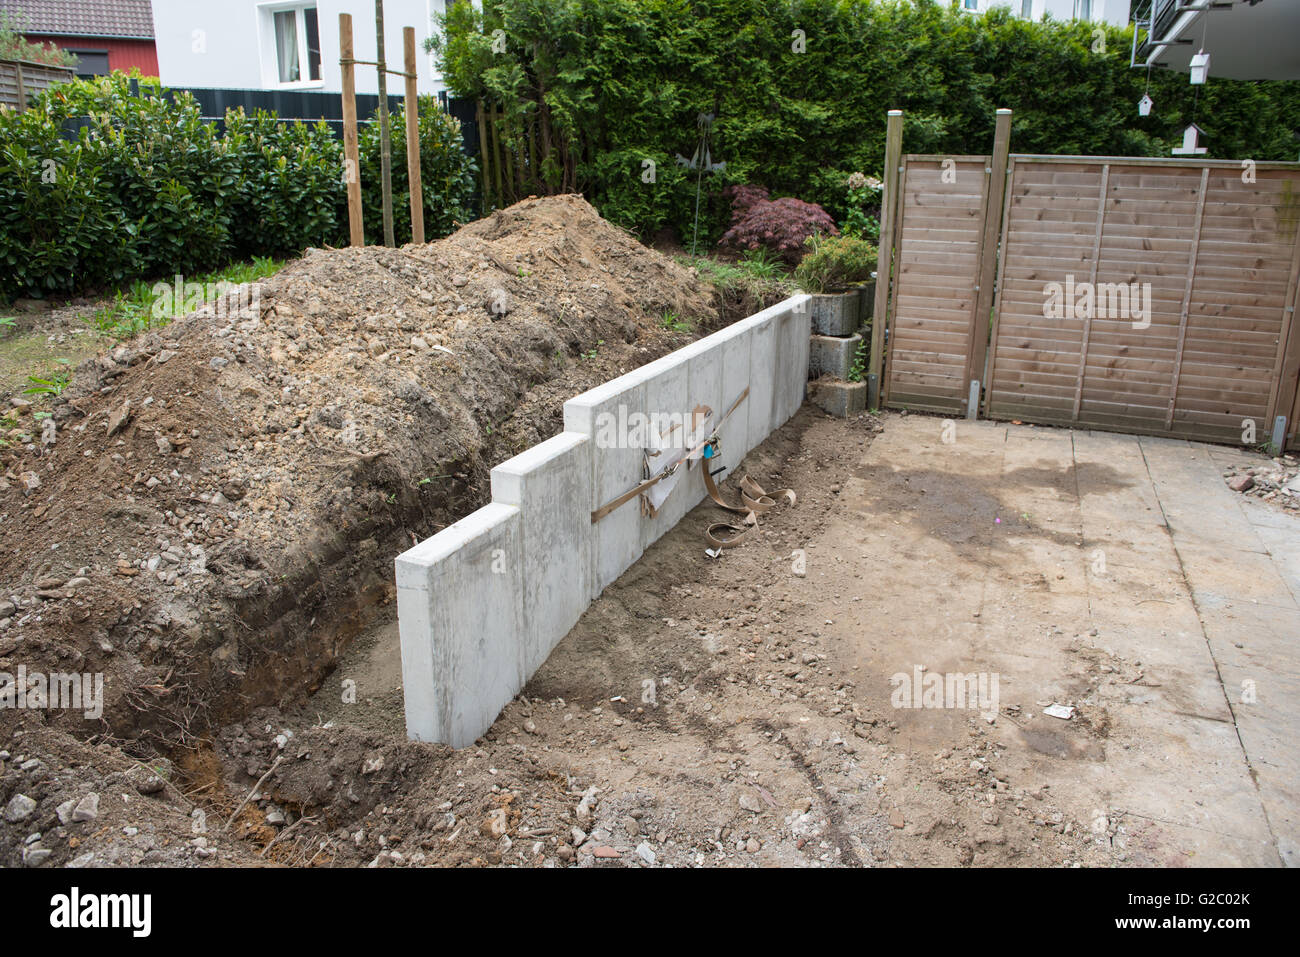 building a new garden with stones, fences and trees Stock Photo